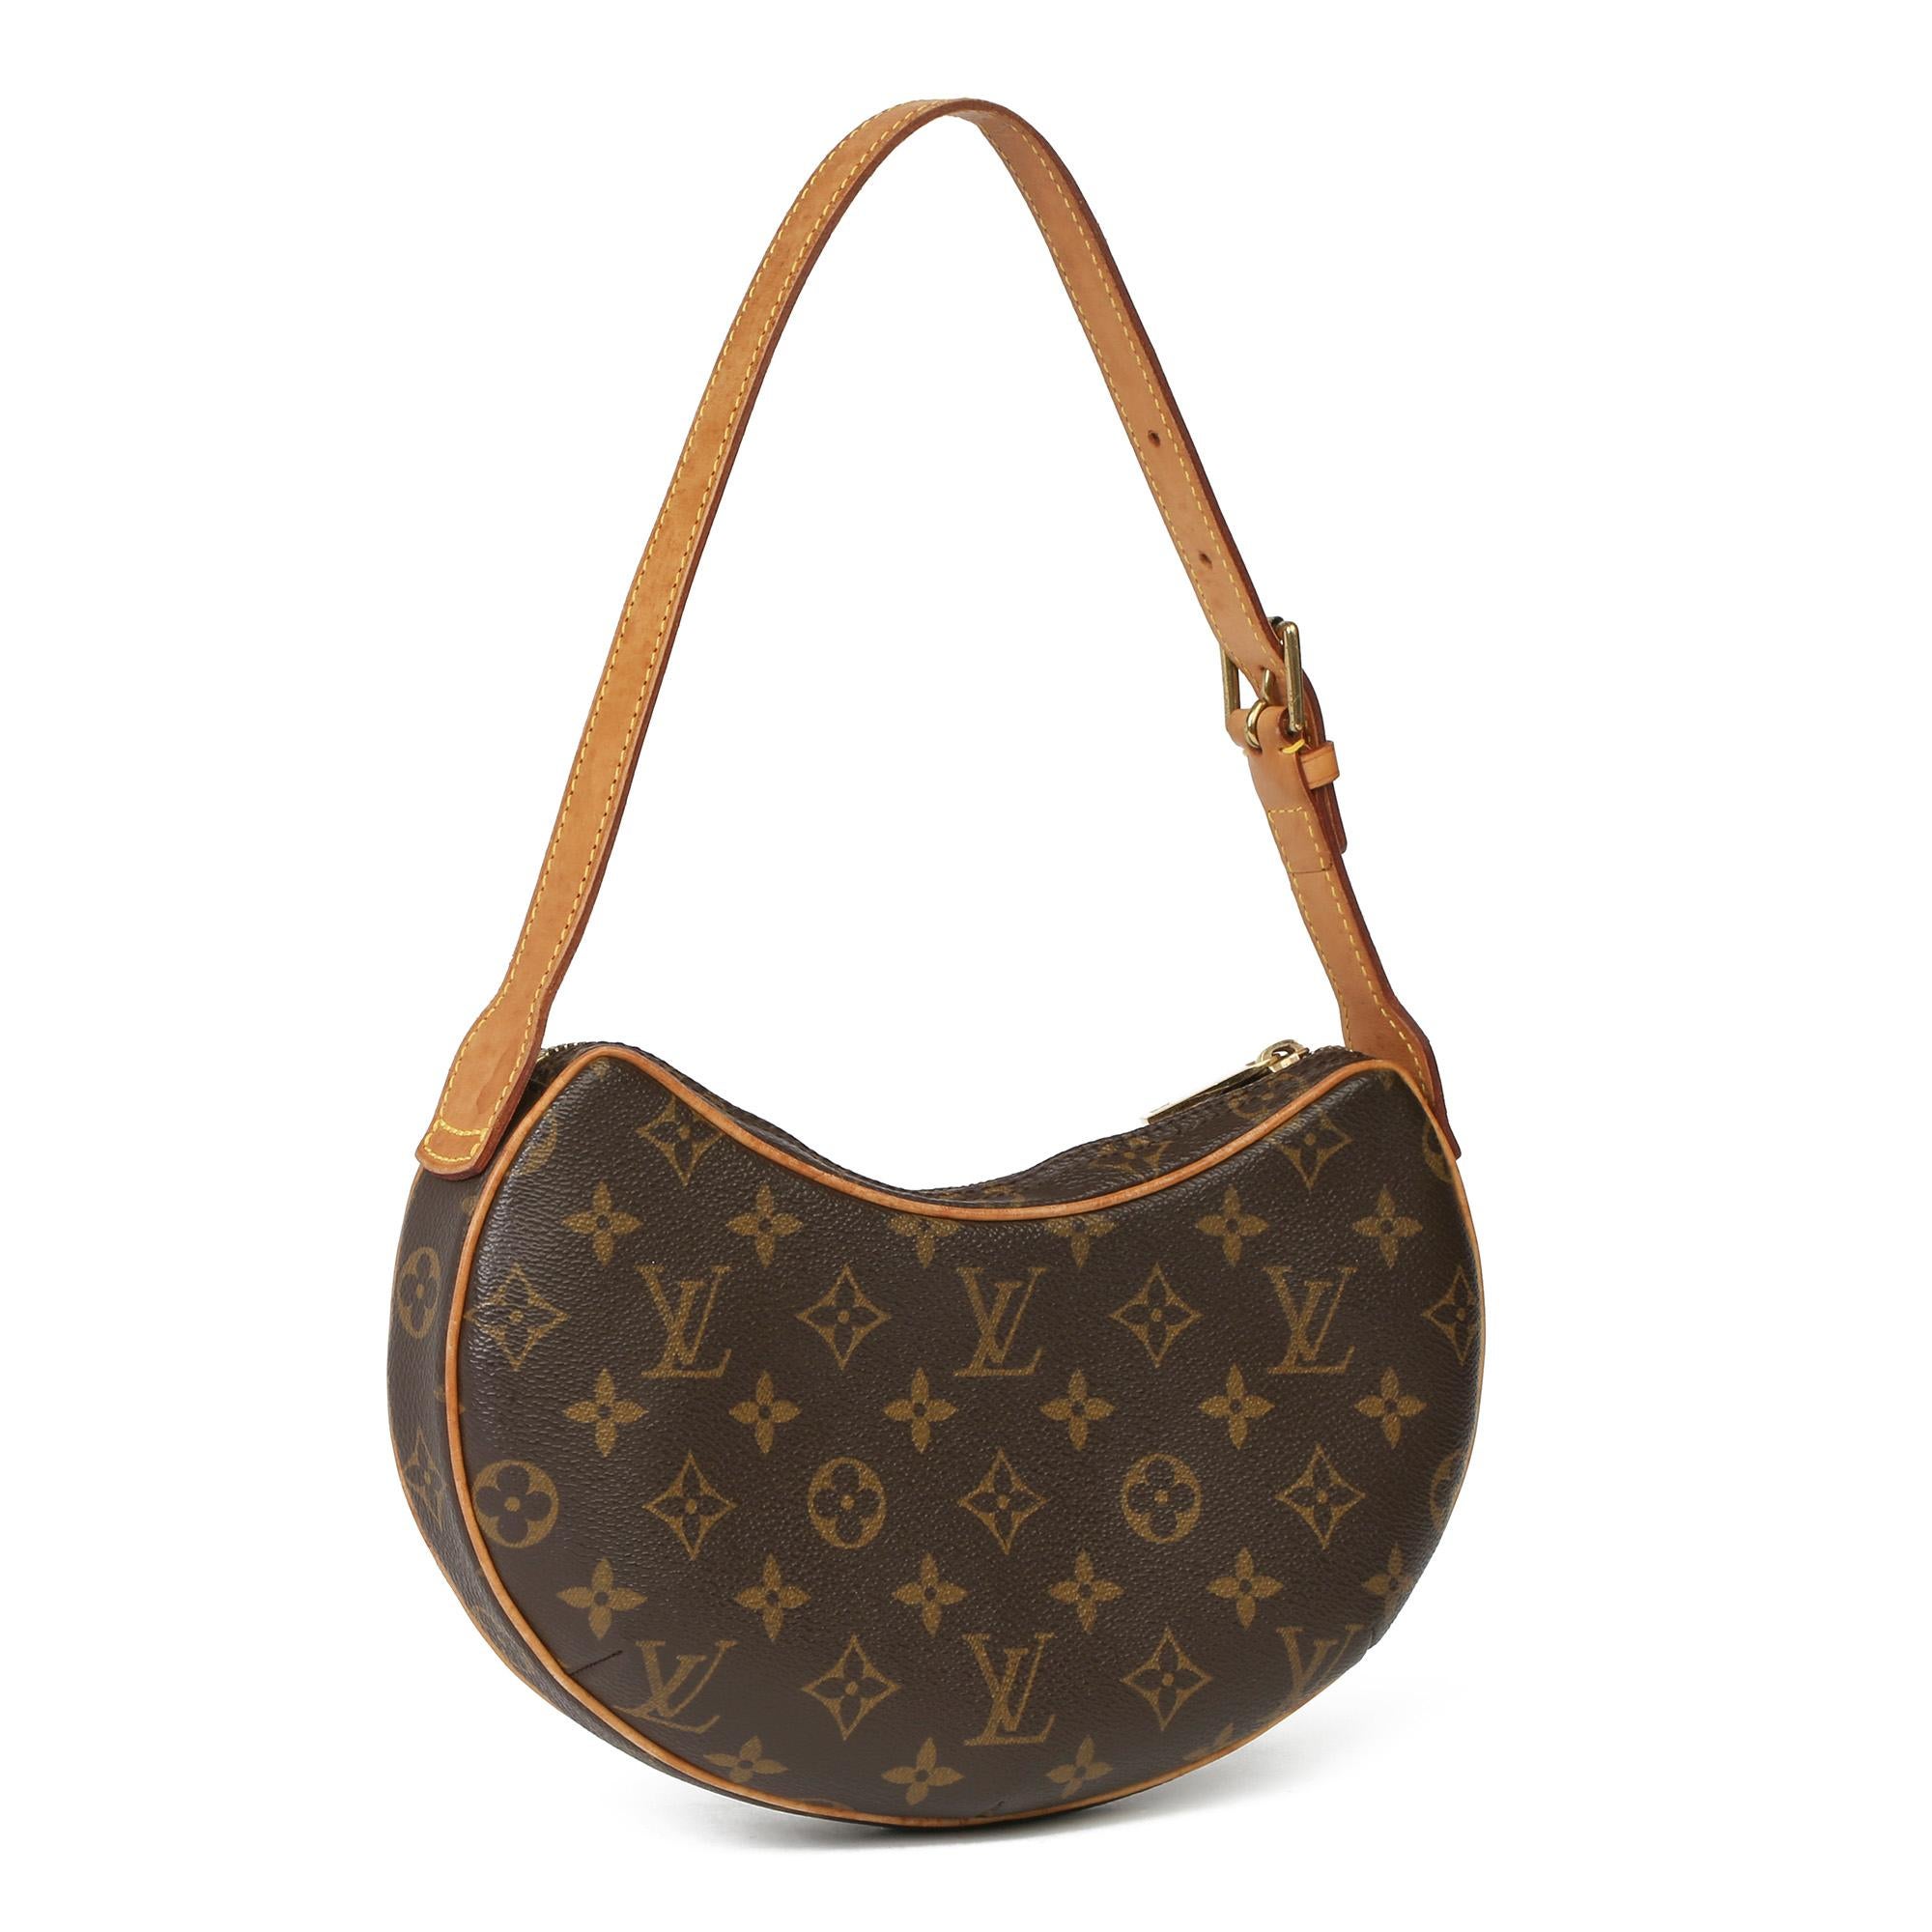 LOUIS VUITTON
Brown Monogram Coated Canvas & Vachetta Leather Croissant PM 

Xupes Reference: HB3947
Serial Number: SP1022
Age (Circa): 2002
Accompanied By: Louis Vuitton Dust Bag
Authenticity Details: Date Stamp (Made in France) 
Gender: